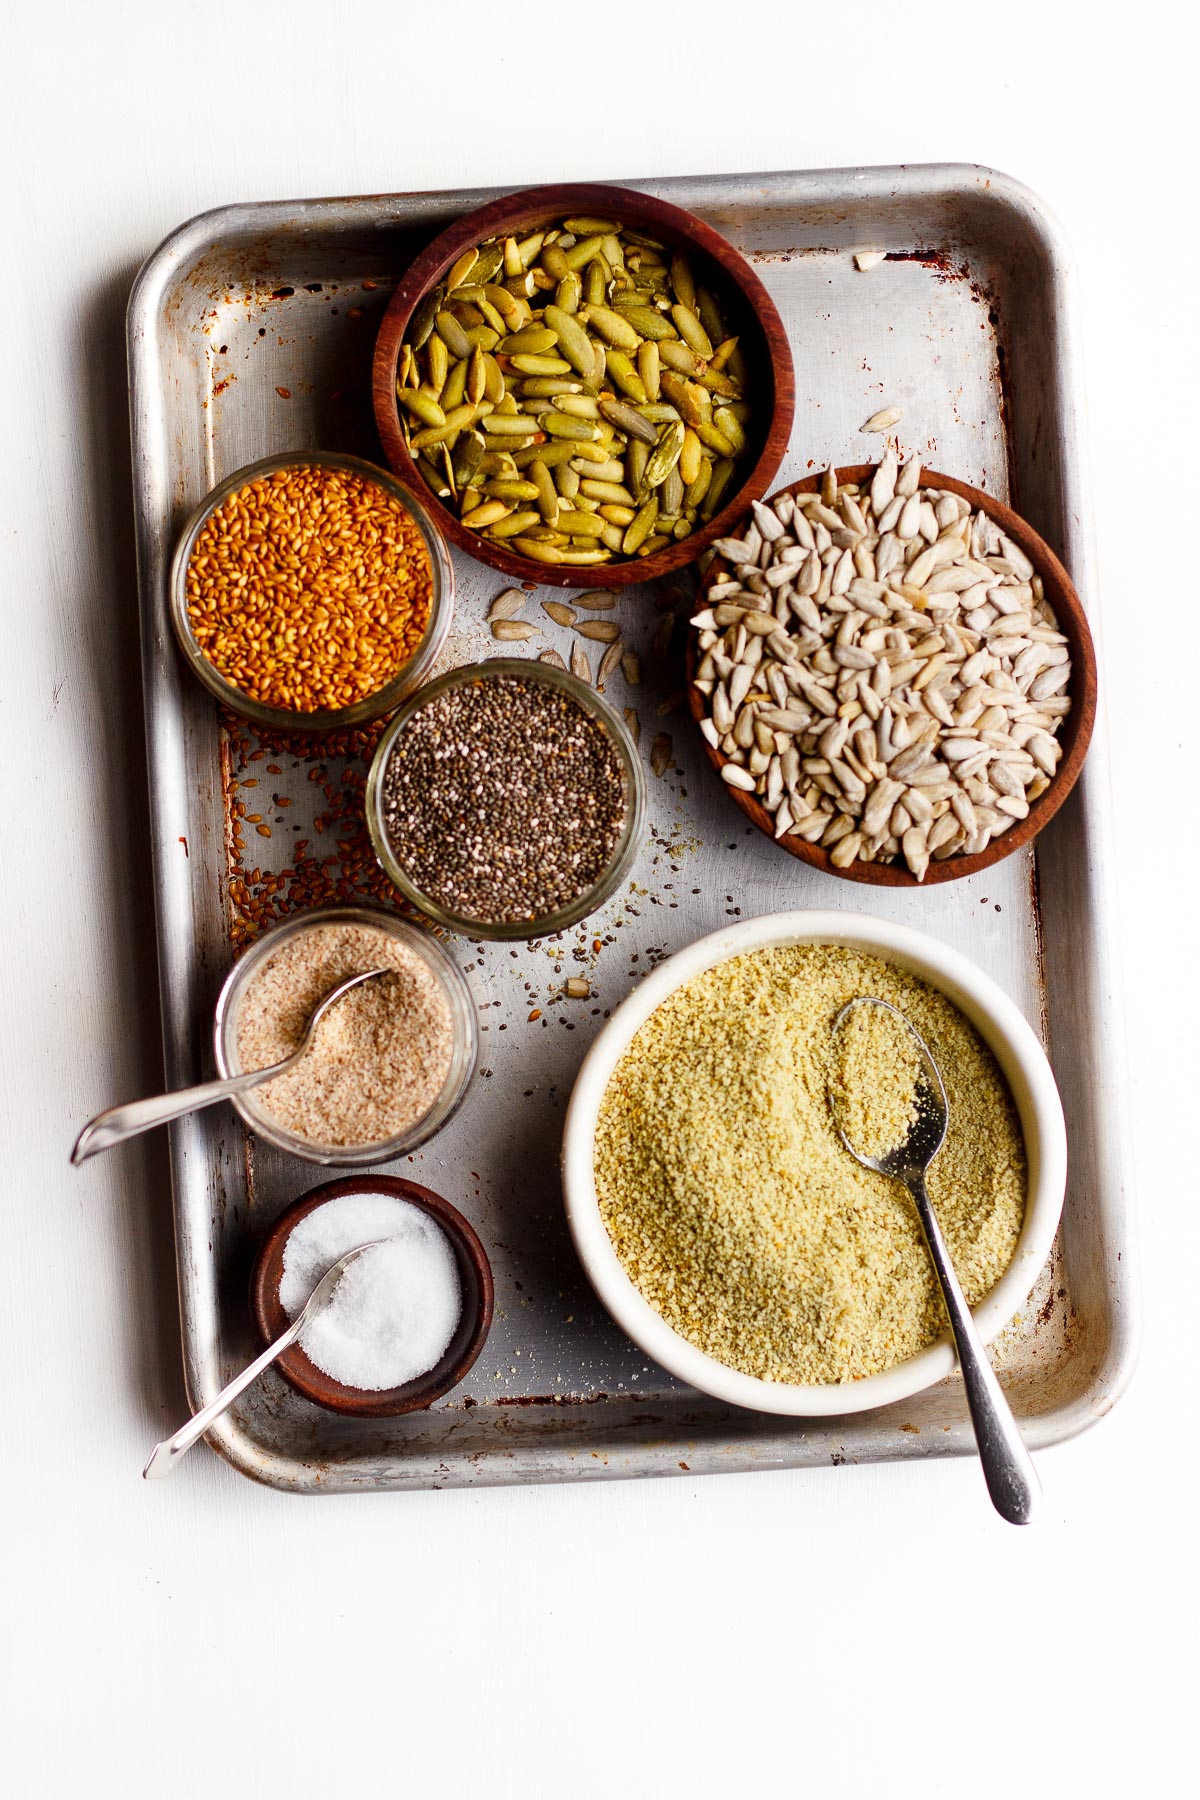 ingredients in bowls on a tray